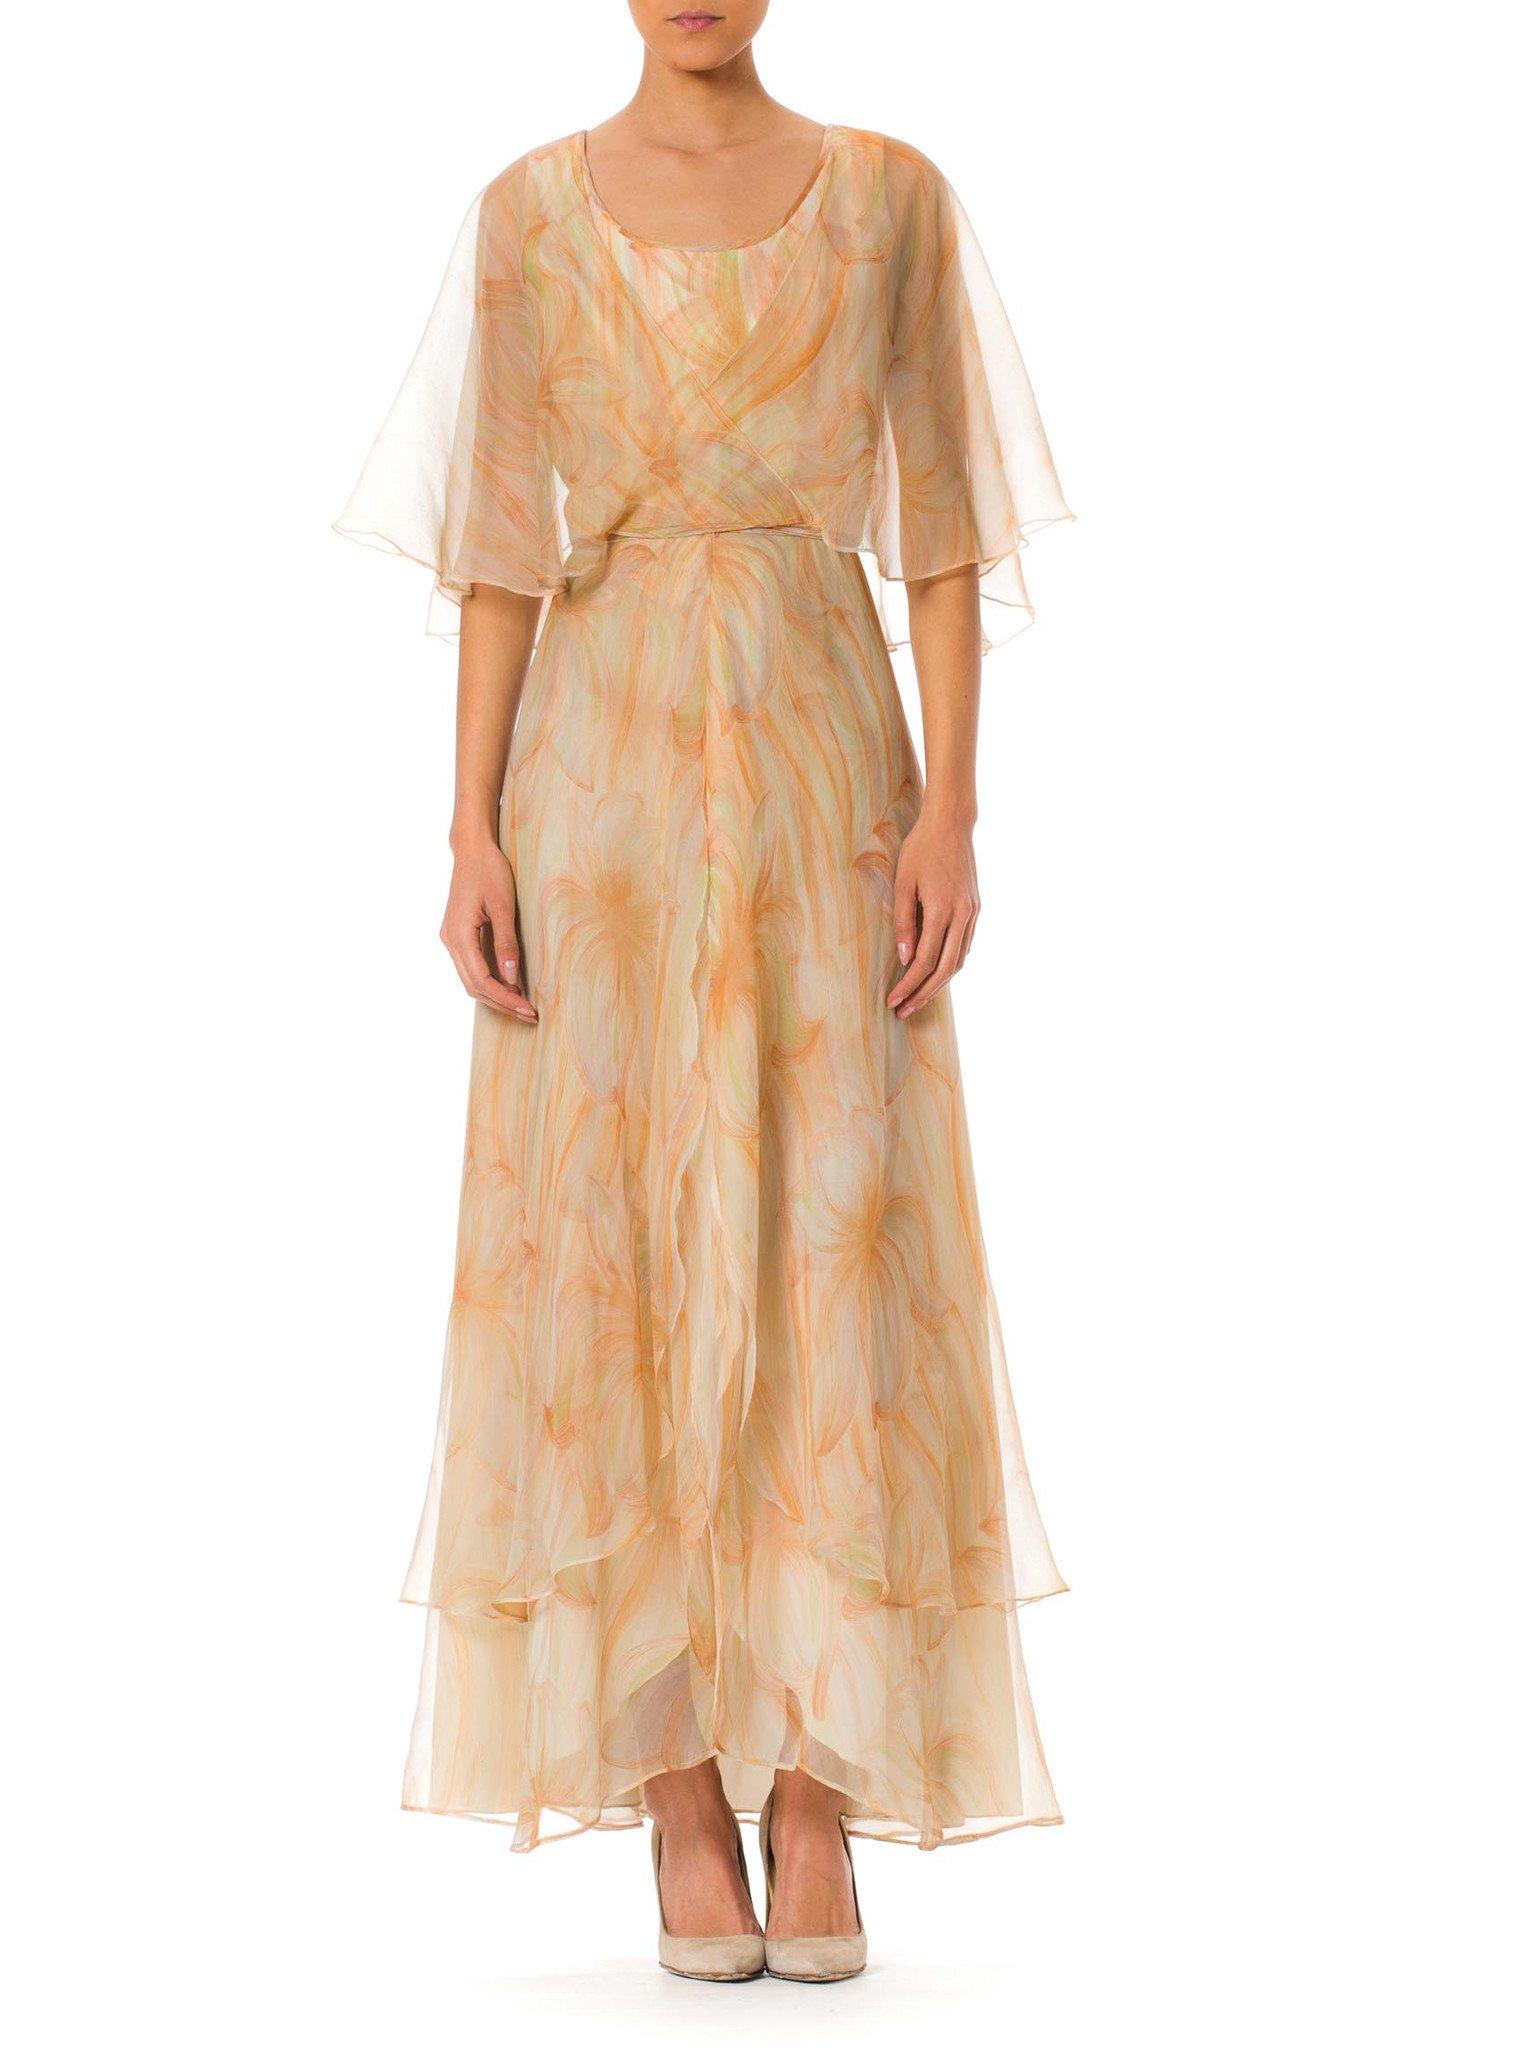 1970S MR BLACKWELL CUSTOM Polyester Chiffon Pastel Brushstroke Print Tiered Gown With Cape Sleeves